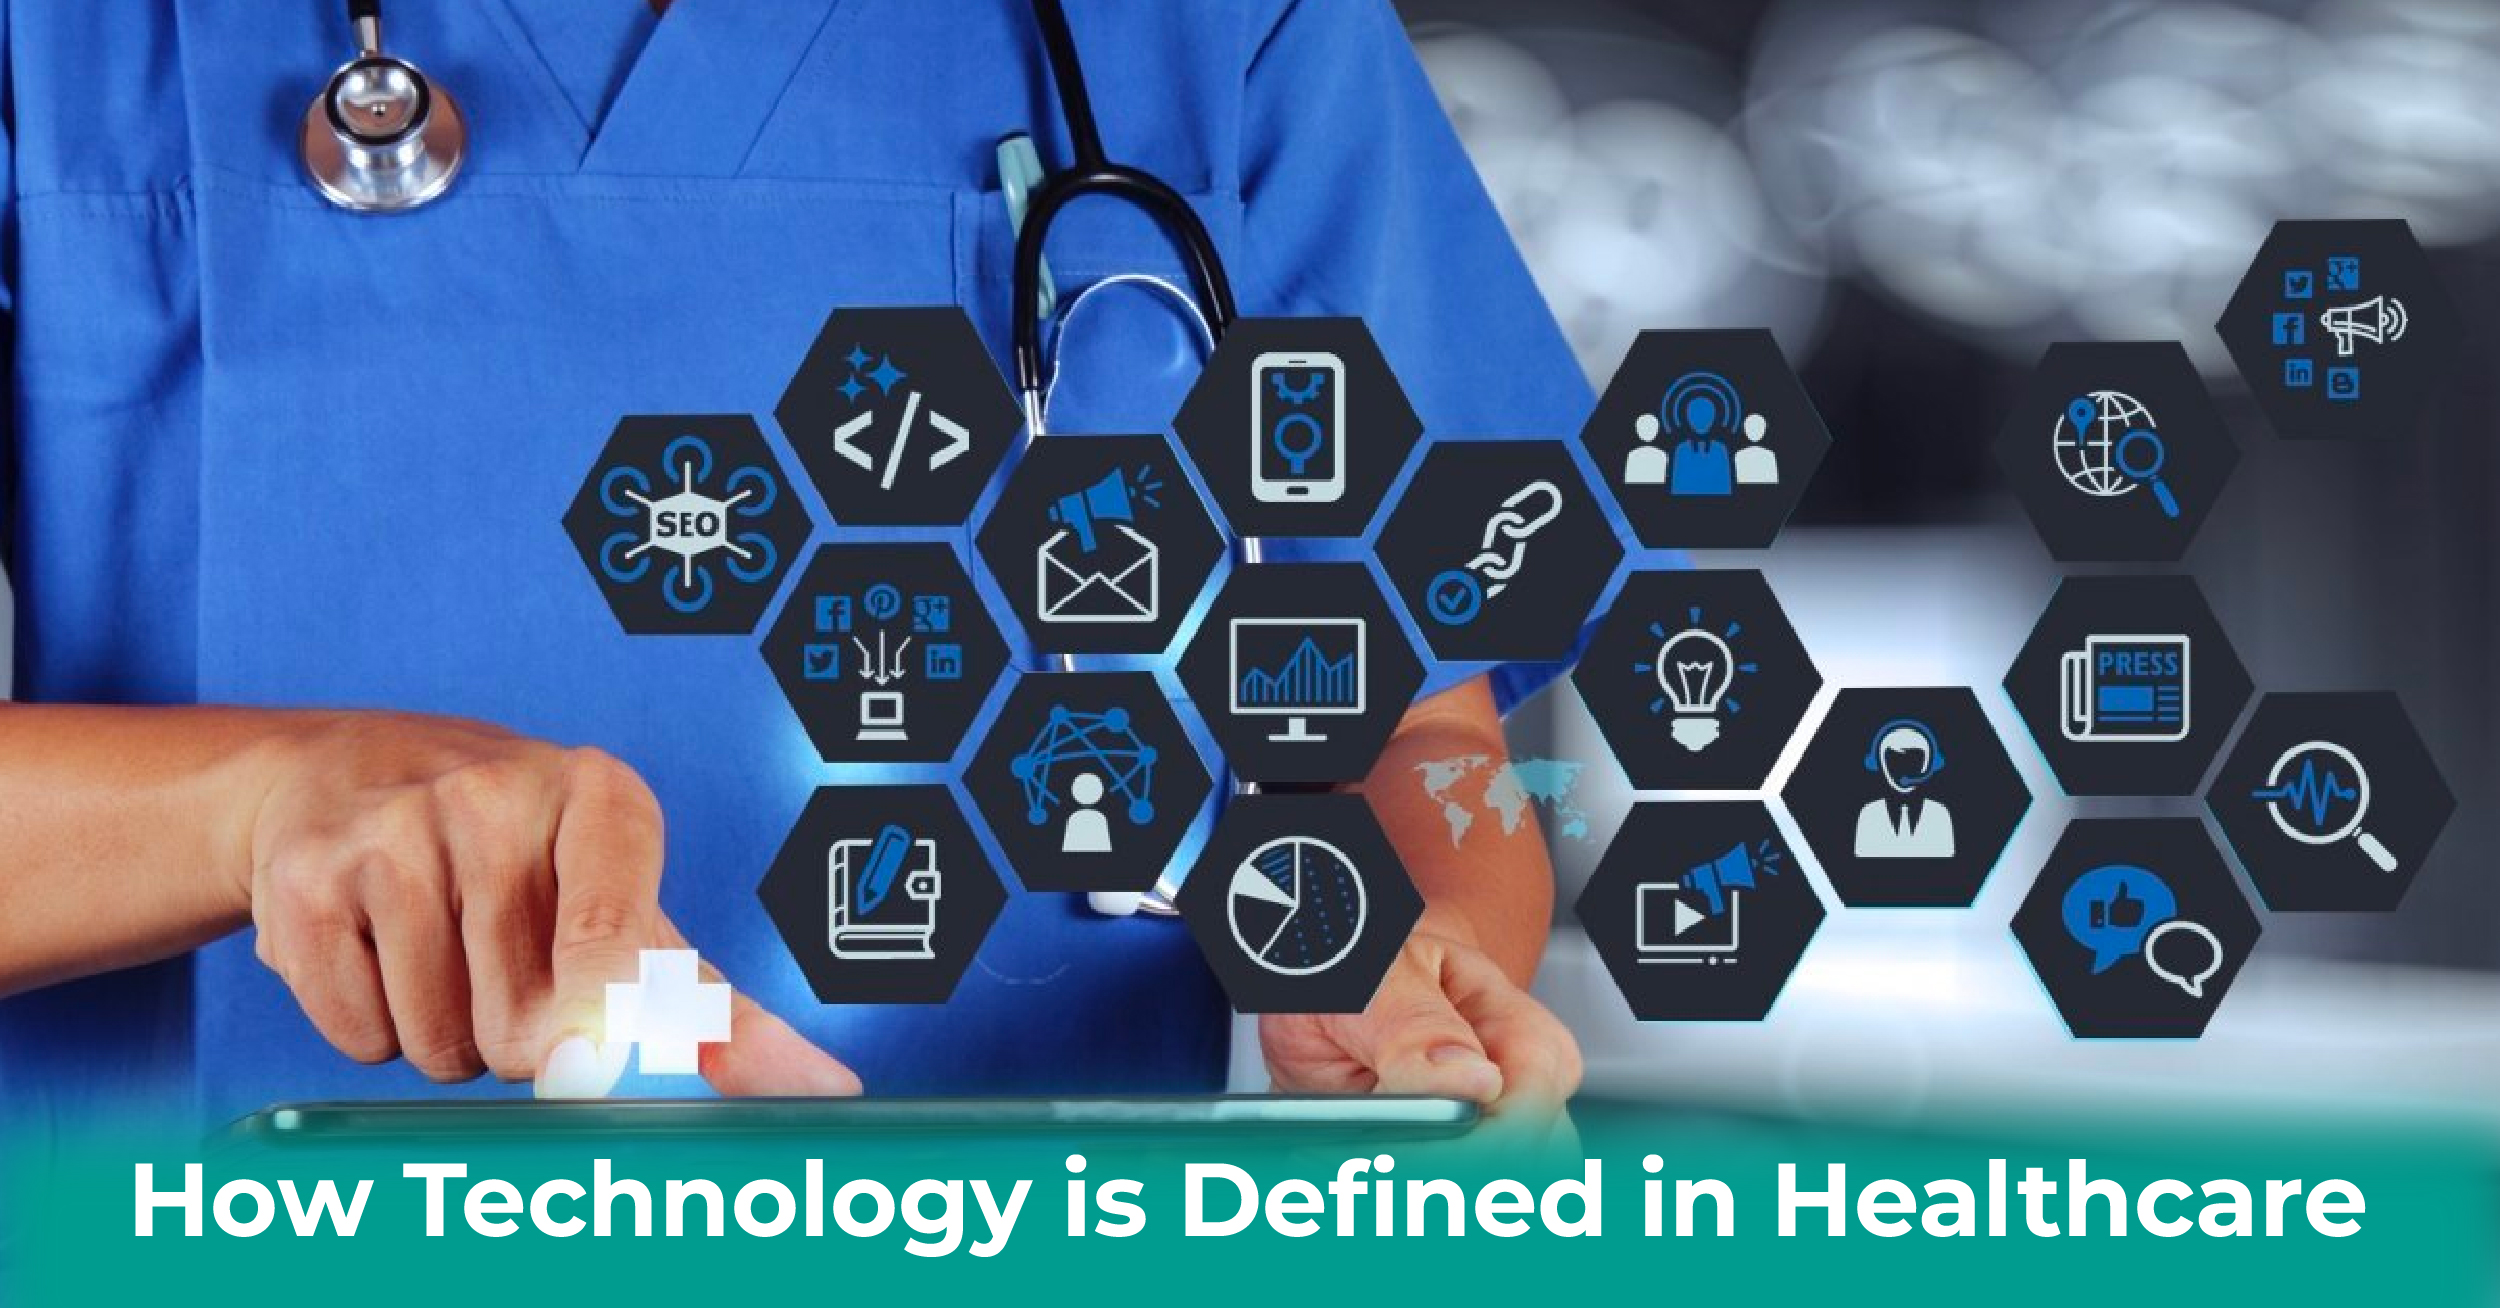 How Technology is Defined in Healthcare